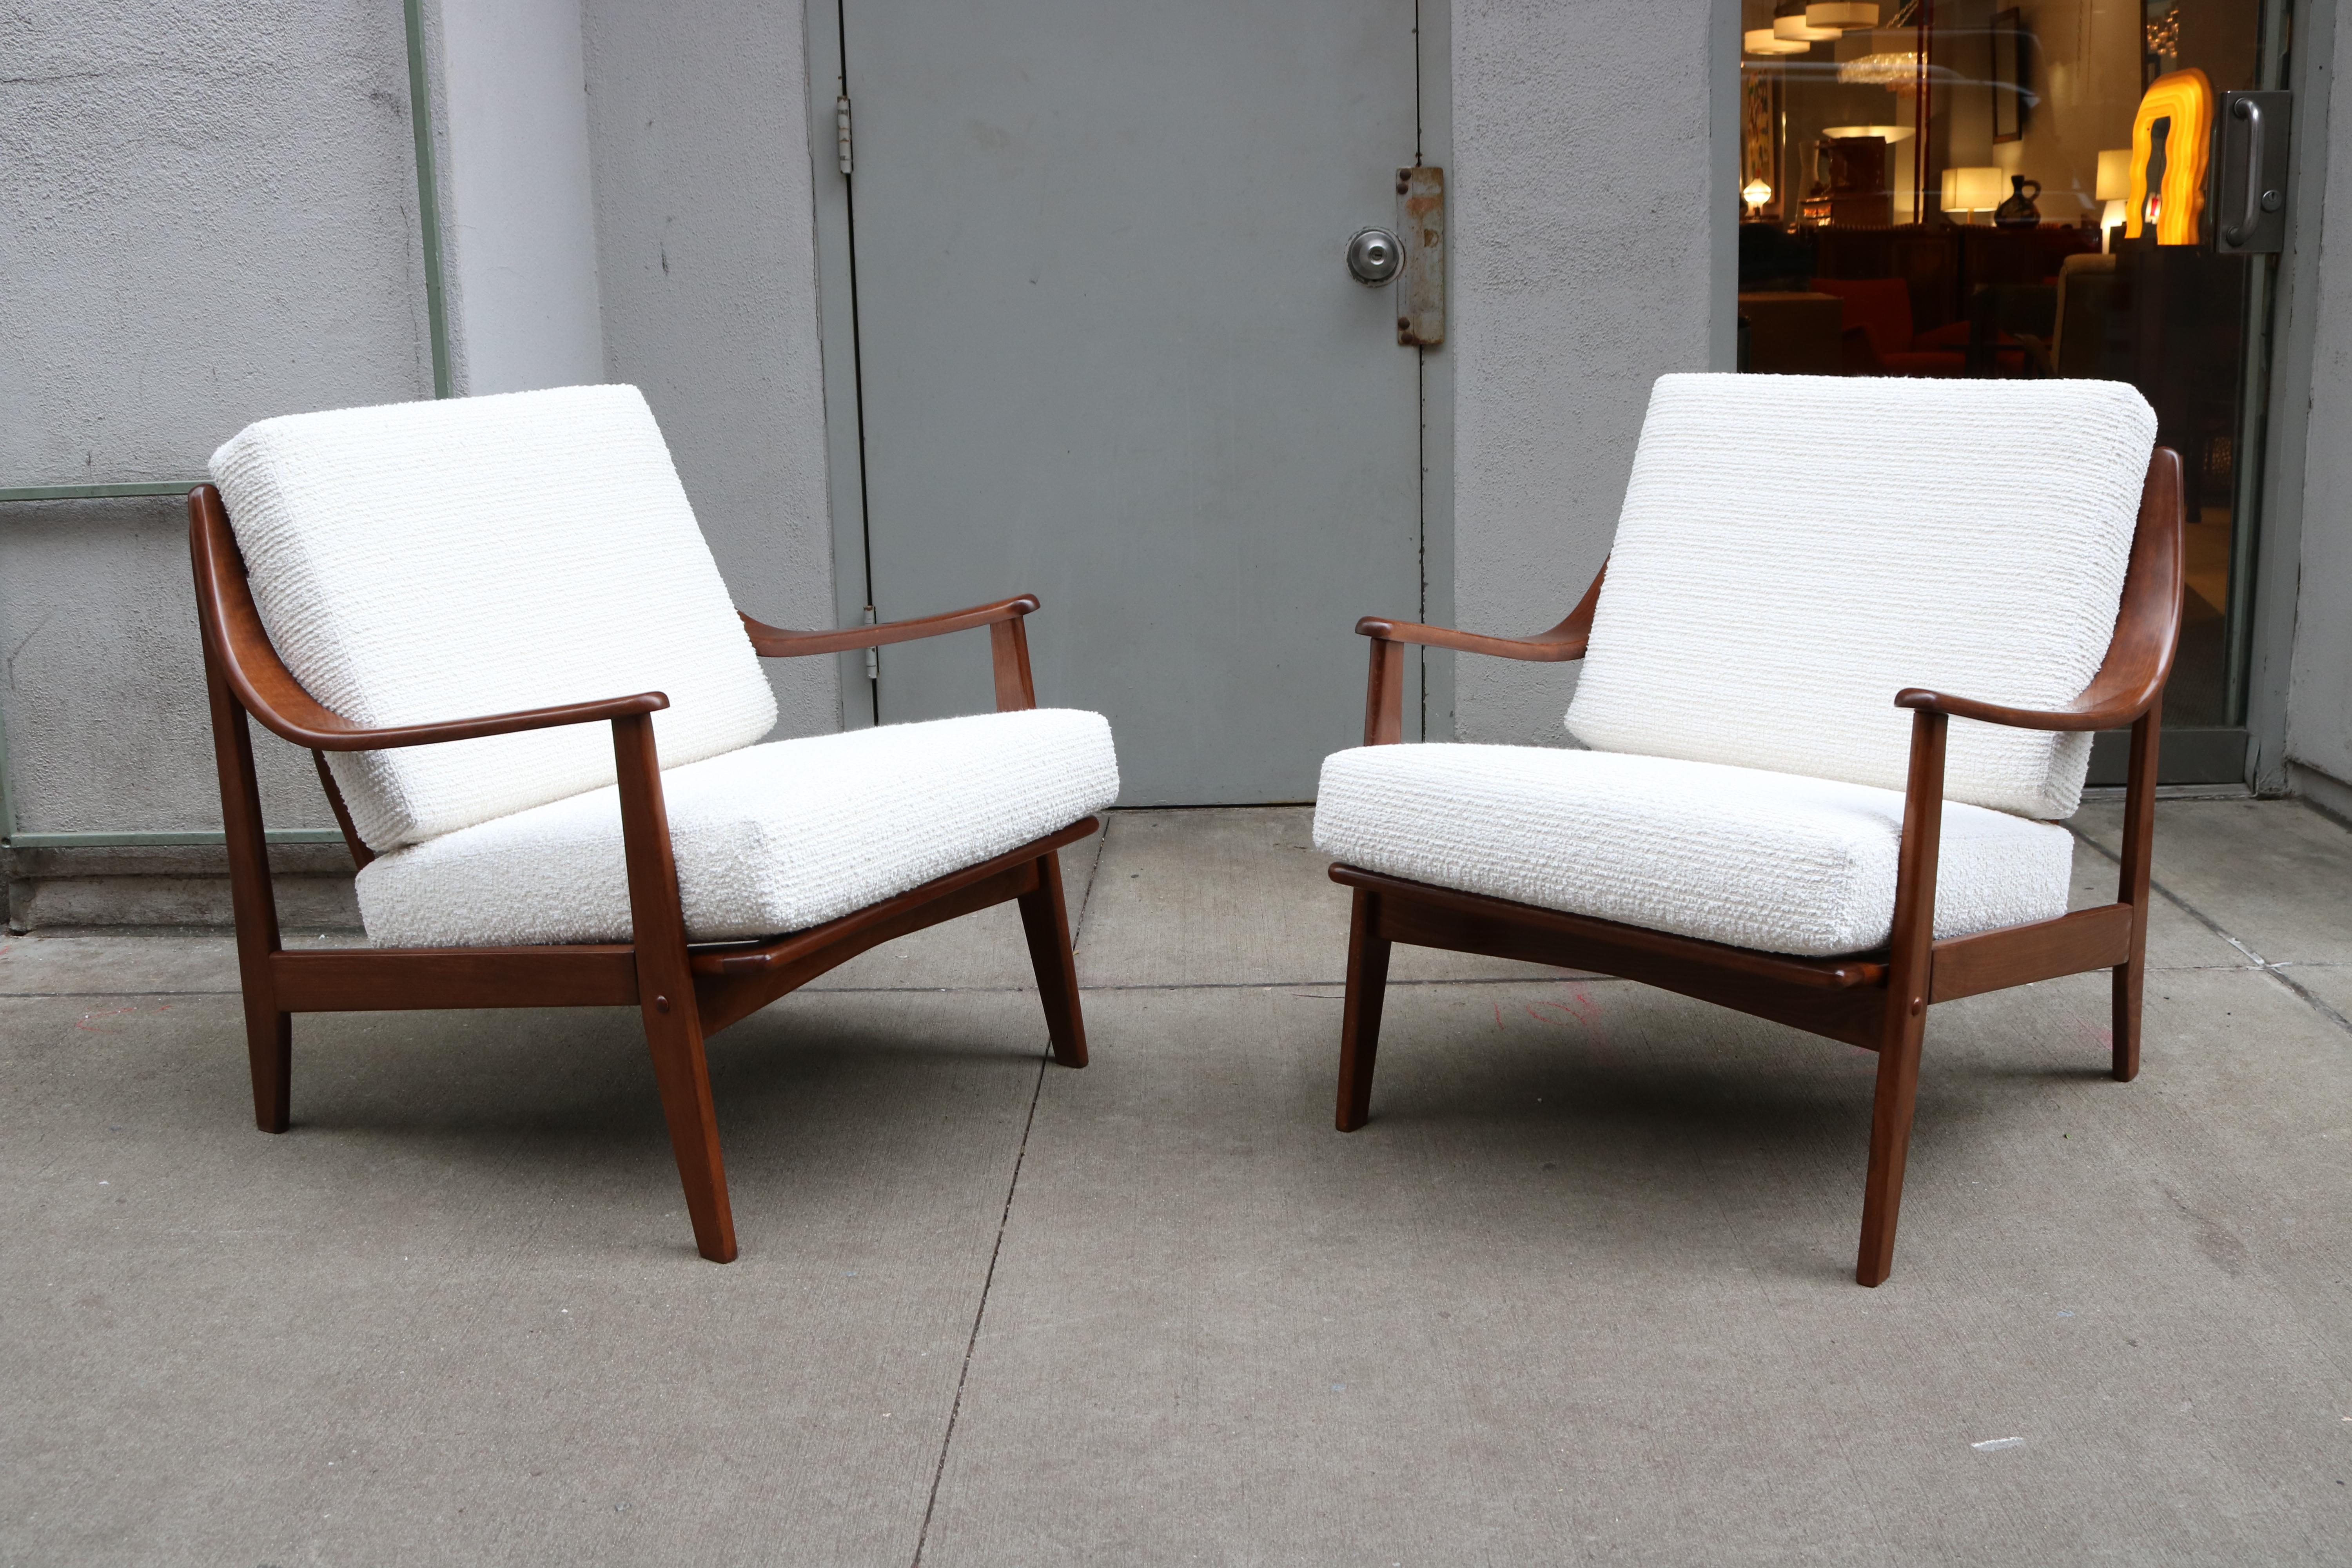 Pair of teak wood armchairs with high curved armrests. 
Designed by Peter Hvidt & Orla Mølgaard-Nielsen for France & Son.
The chairs feature two cushions that have been recovered with a white bouclé fabric.